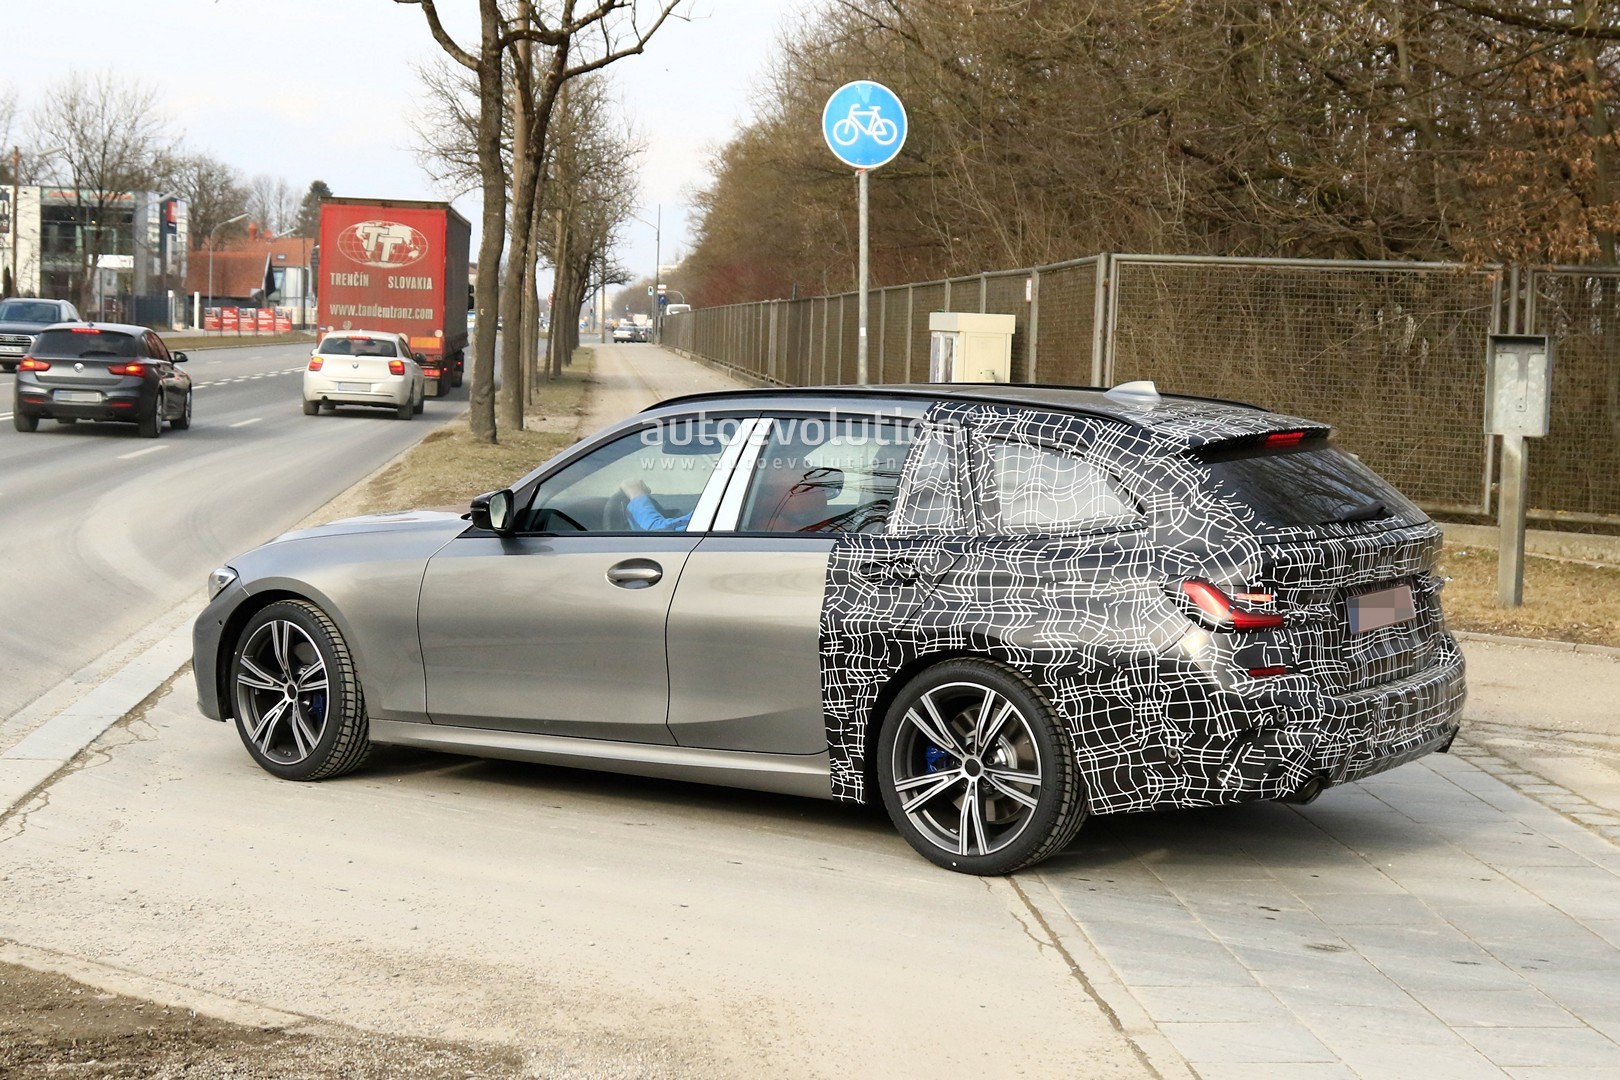 2020-bmw-3-series-touring-spied-winter-testing-with-m-sport-package_21.jpg